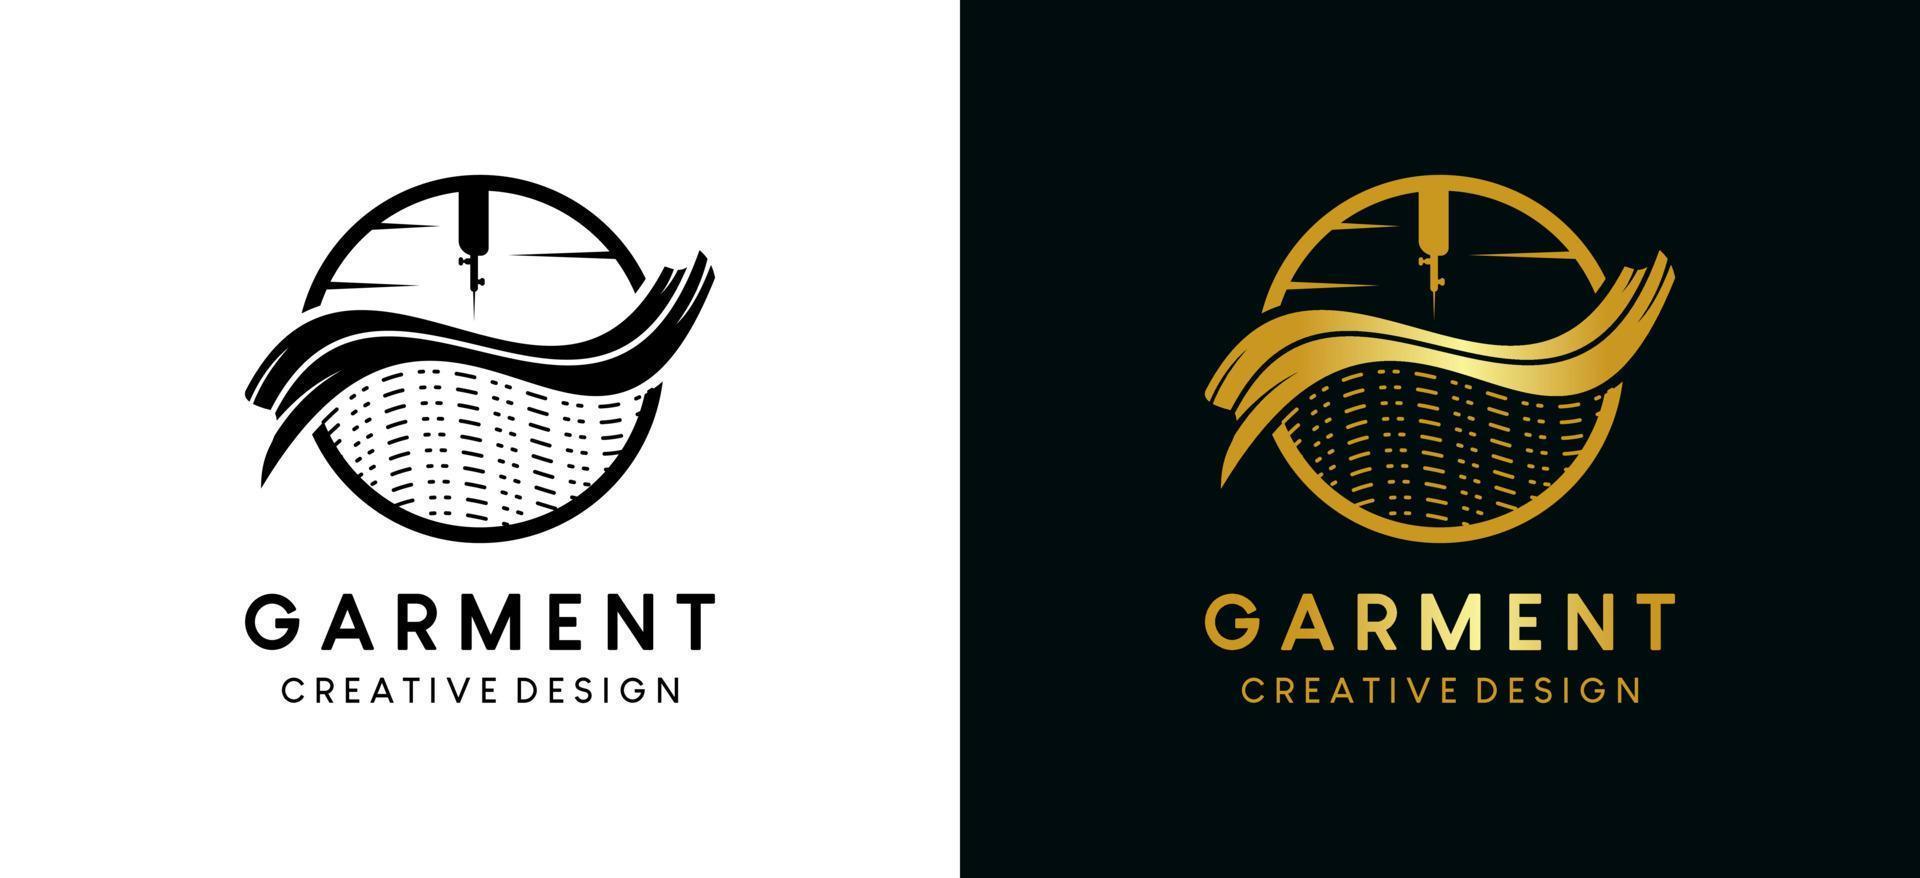 Garment logo design with sewing machine needle concept and fabric icon vector